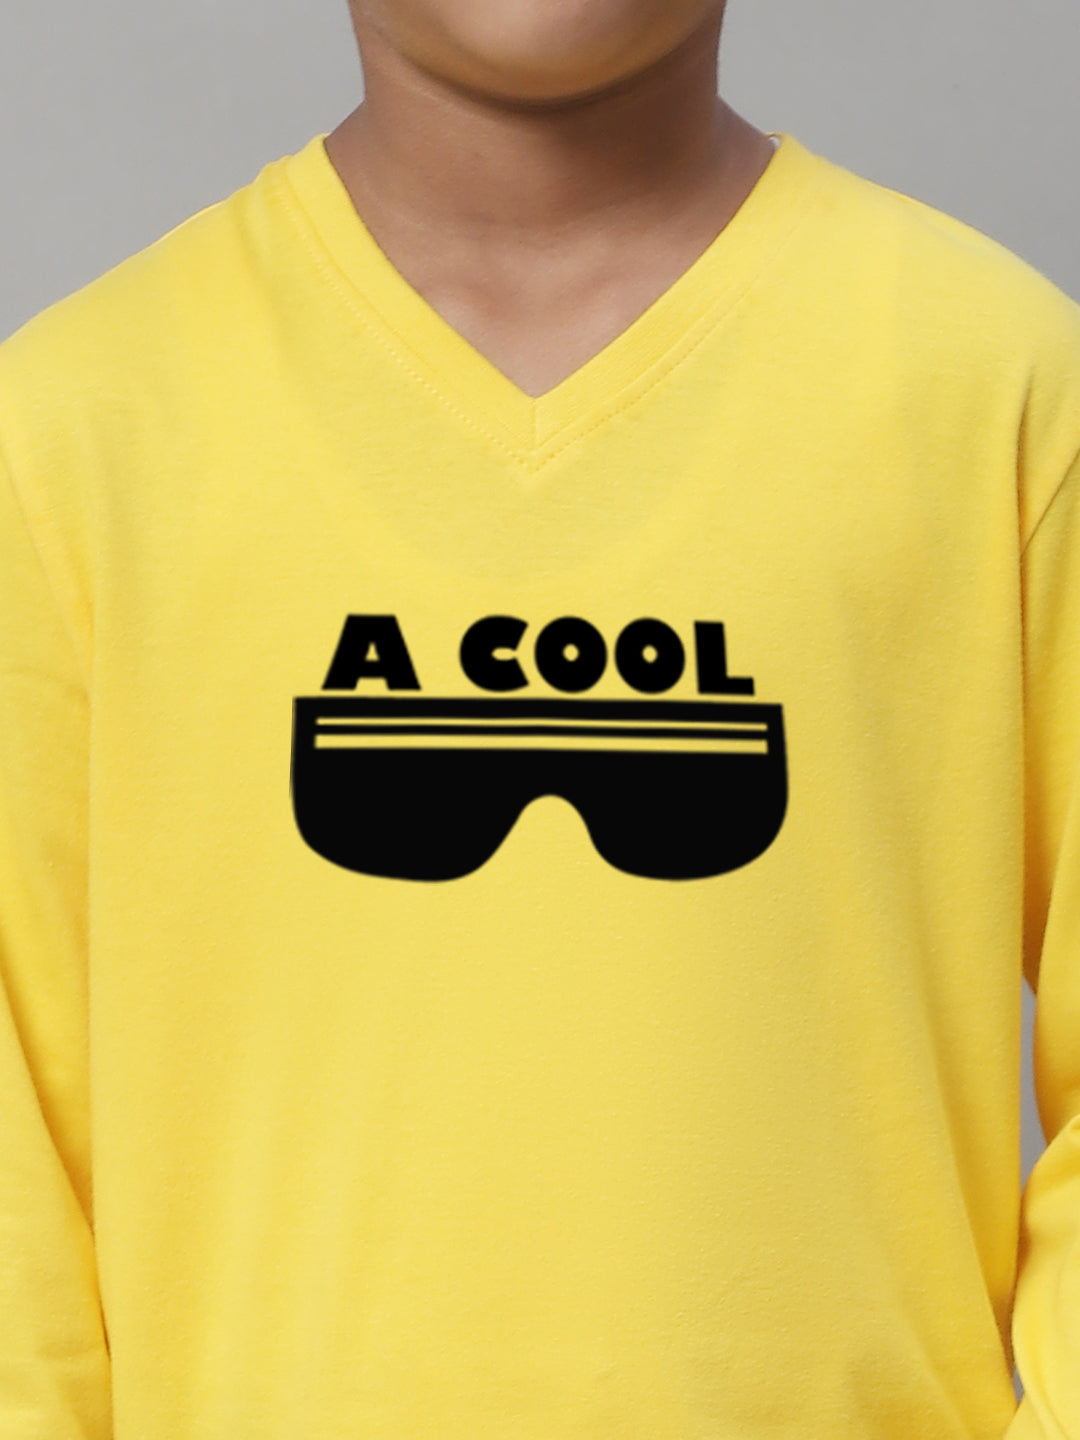 Boys Cool Full Sleeves Printed T-Shirt - Friskers